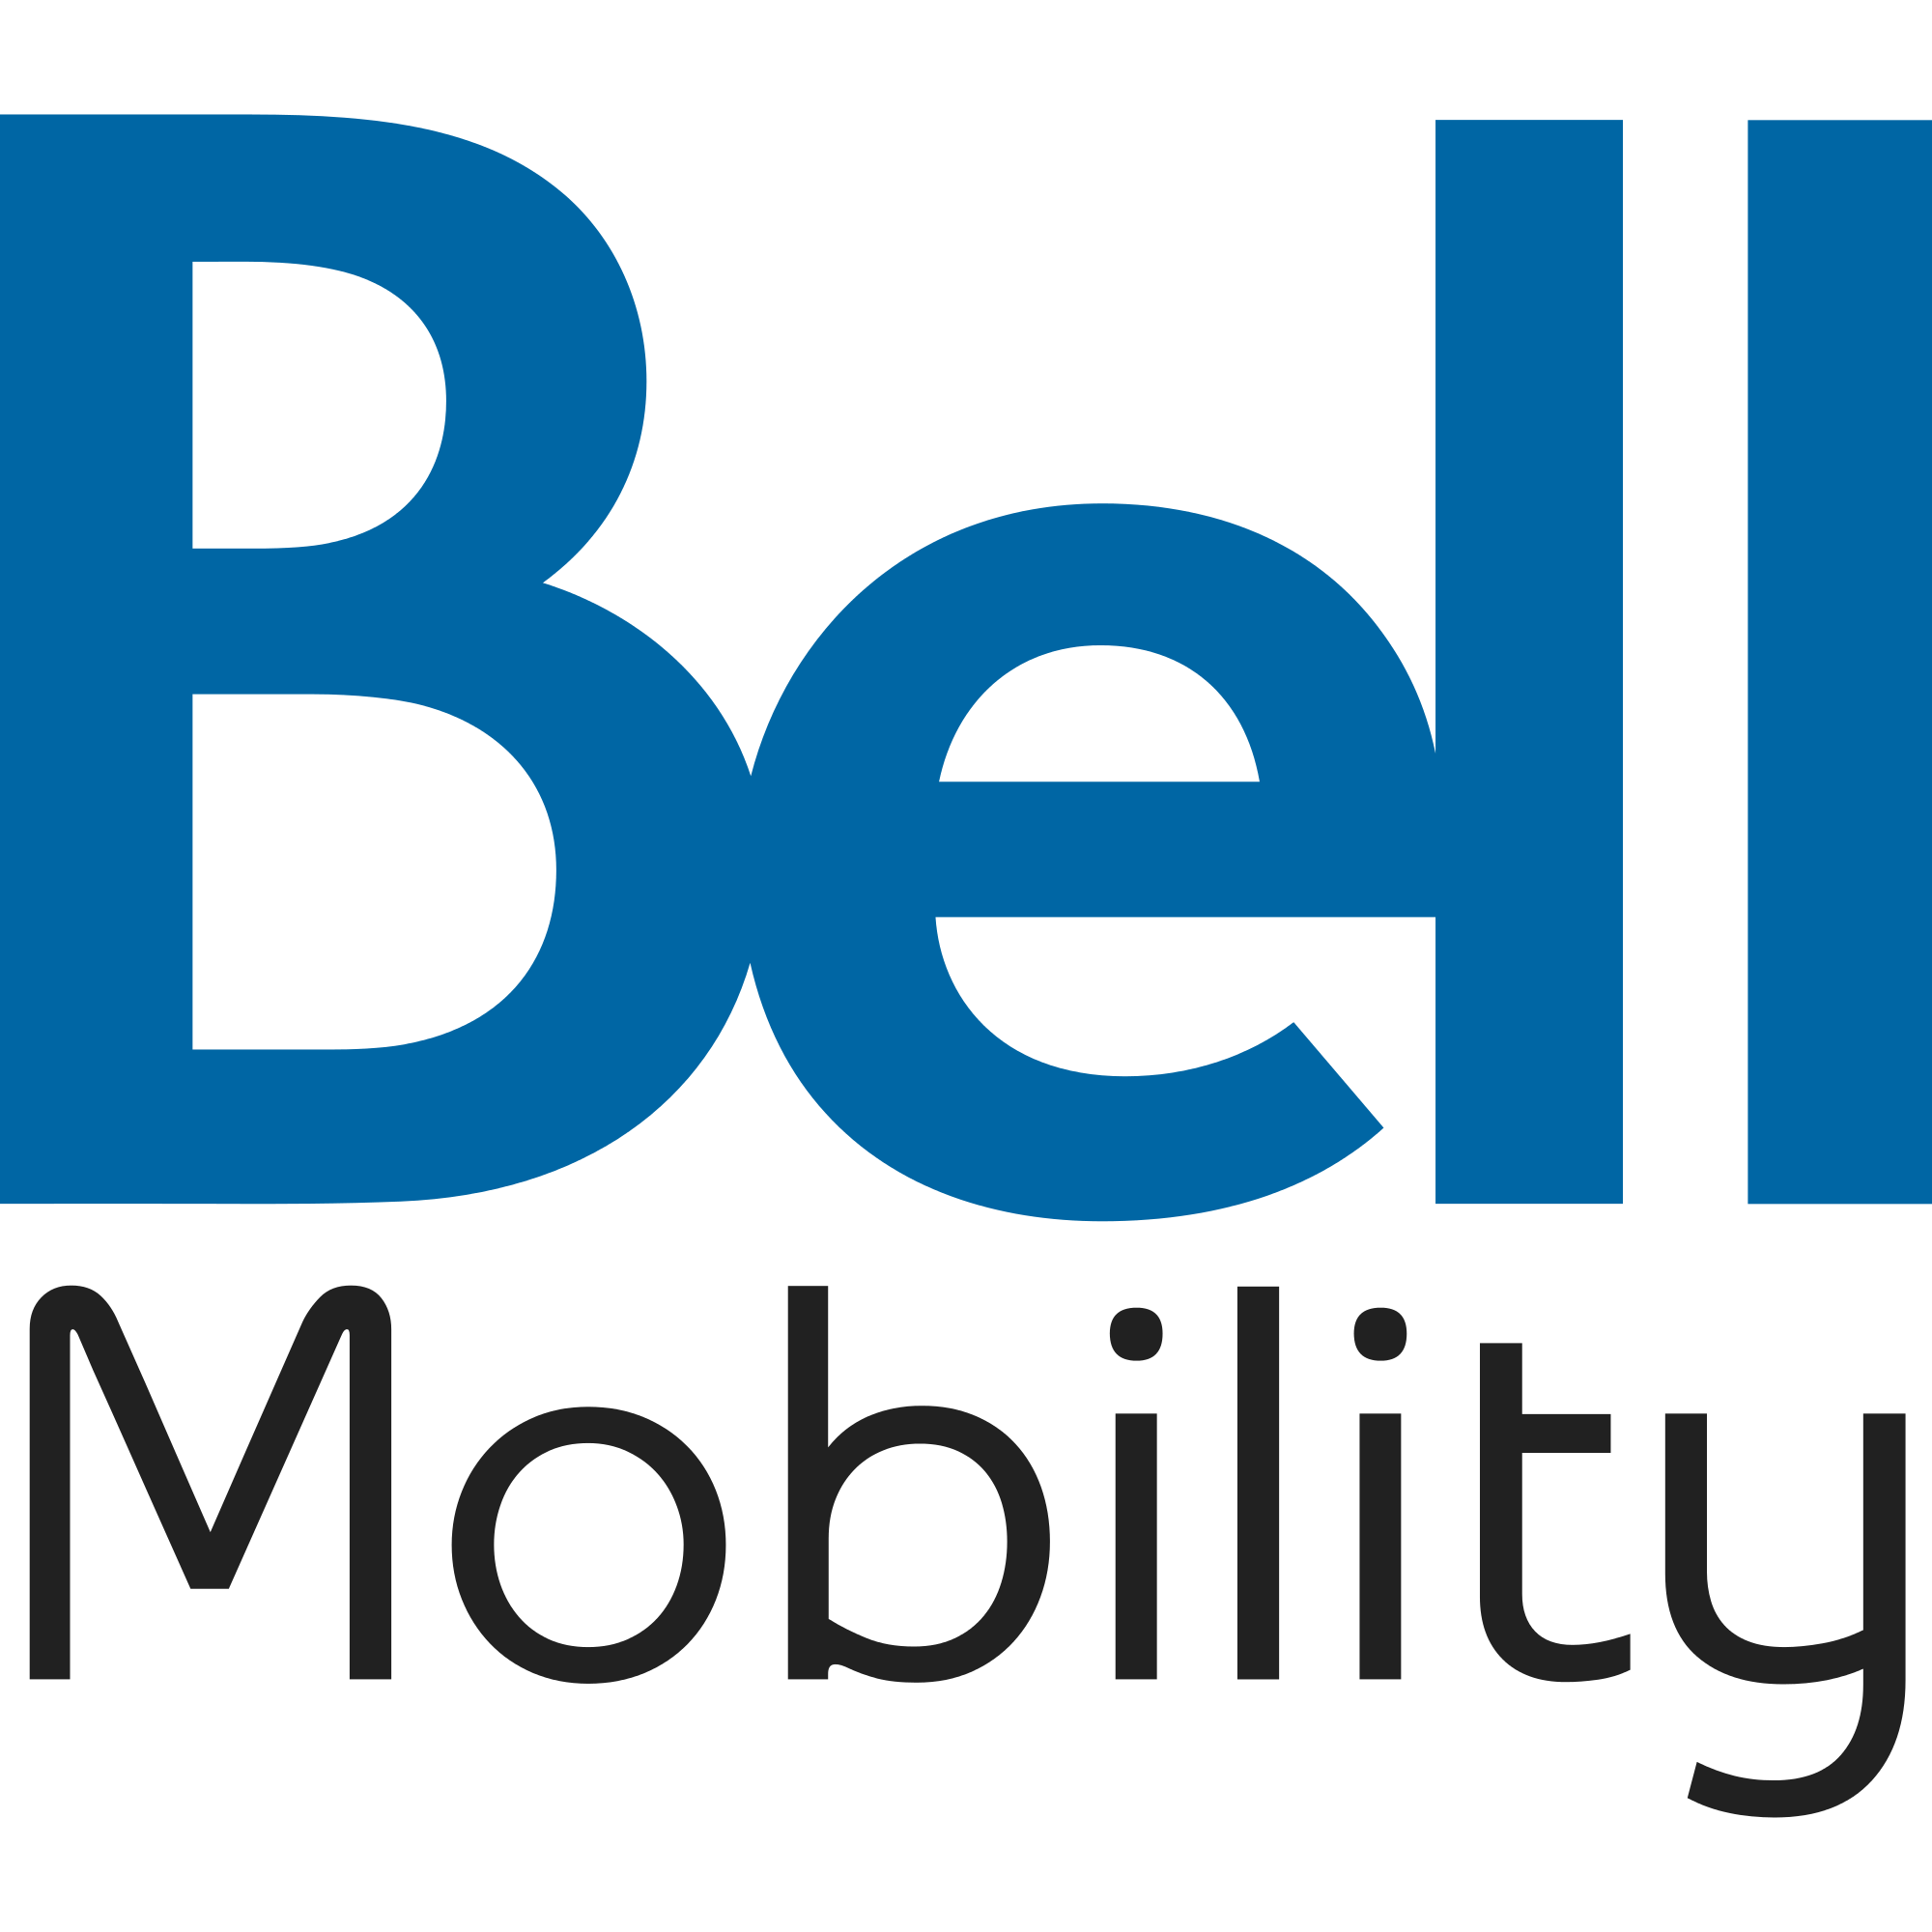 A M Mobility Logo - File:Bell Mobility logo.svg - Wikimedia Commons